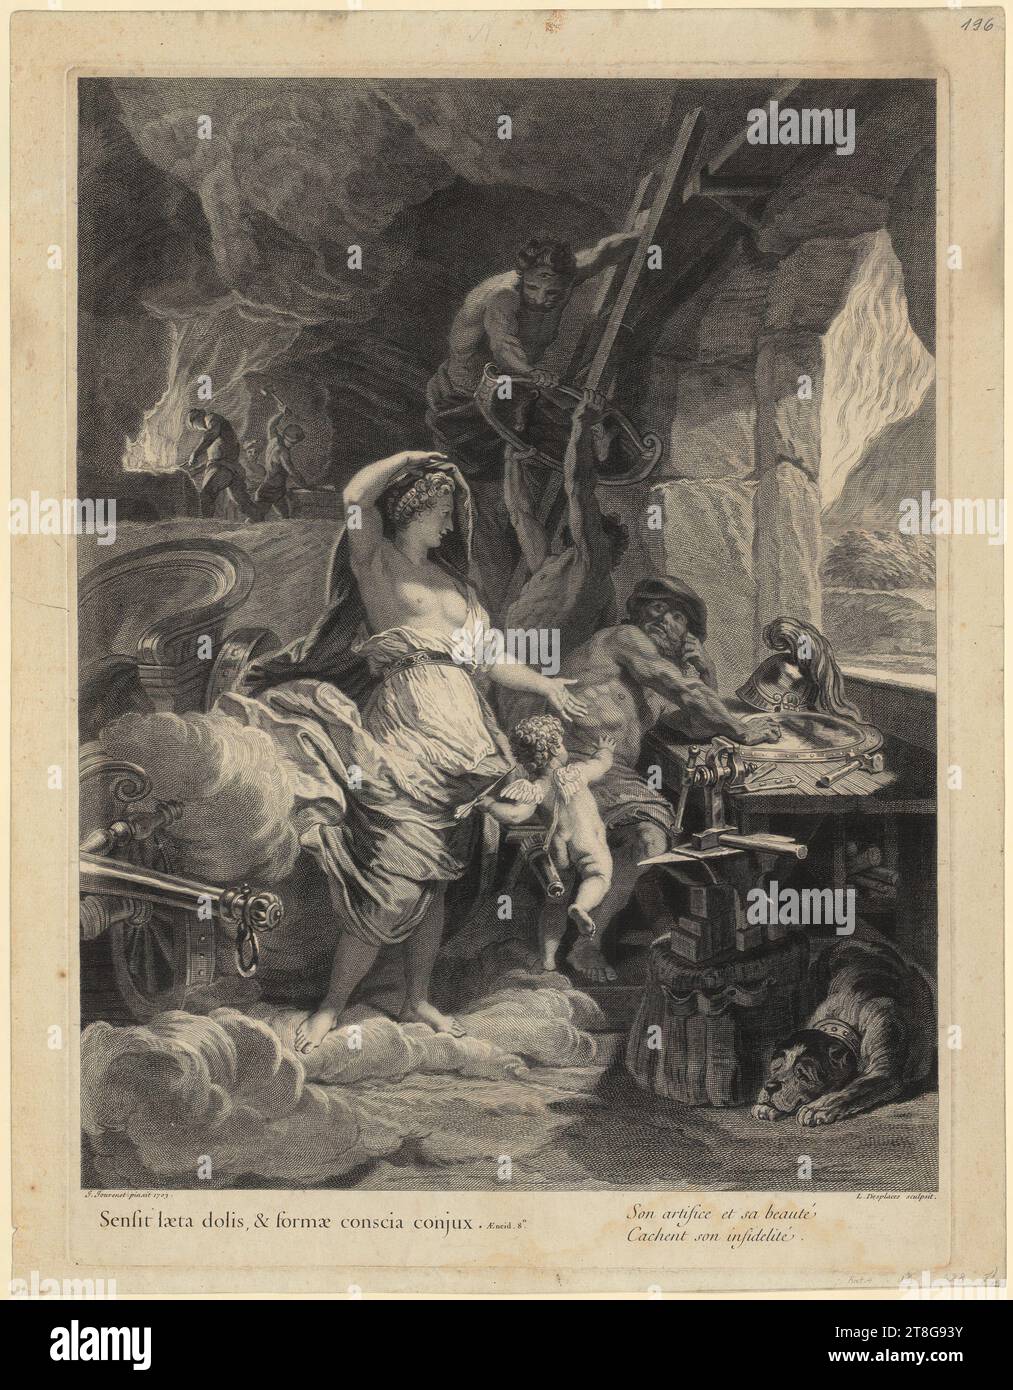 Louis Desplaces (1682 - 1739)Jean Jouvenet (1644 - 1717), after, Venus in the Forge of the Volcano, print medium: circa 1713 - 1739, etching and copperplate engraving, sheet size: 46.9 x 36.4 cm platemark: 43.9 x 32.3 cm, inscribed lower left 'J. Jouvenet pinxit 1703.'; signed lower right 'L.Desplaces sculpsit.'; da Stock Photo